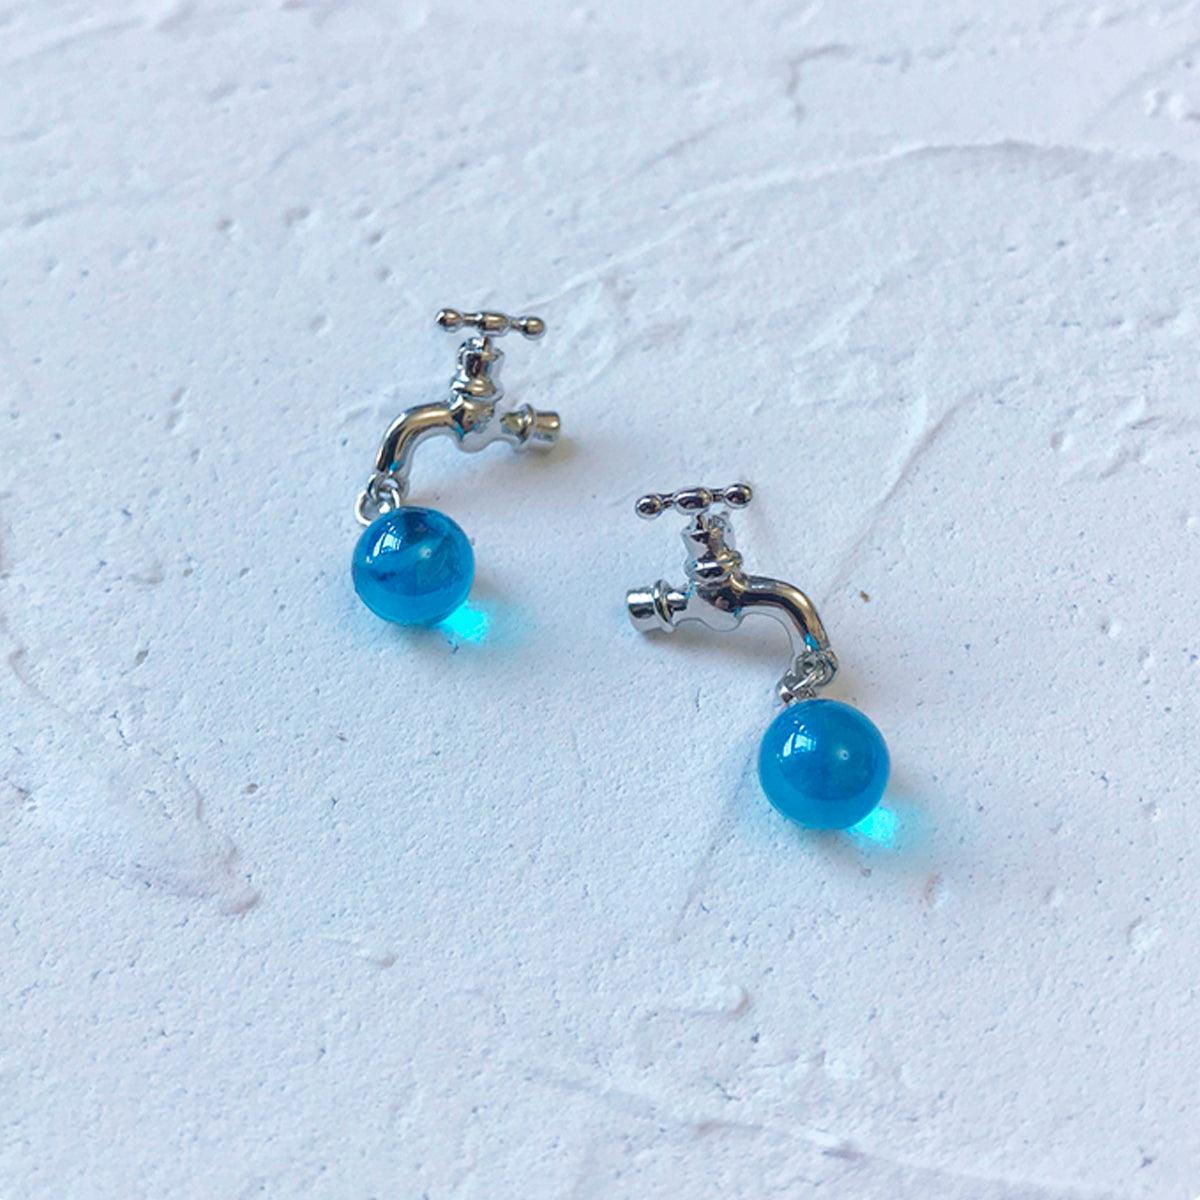 Water Faucet Earrings Water Drop - Aesthetic Clothes Shop